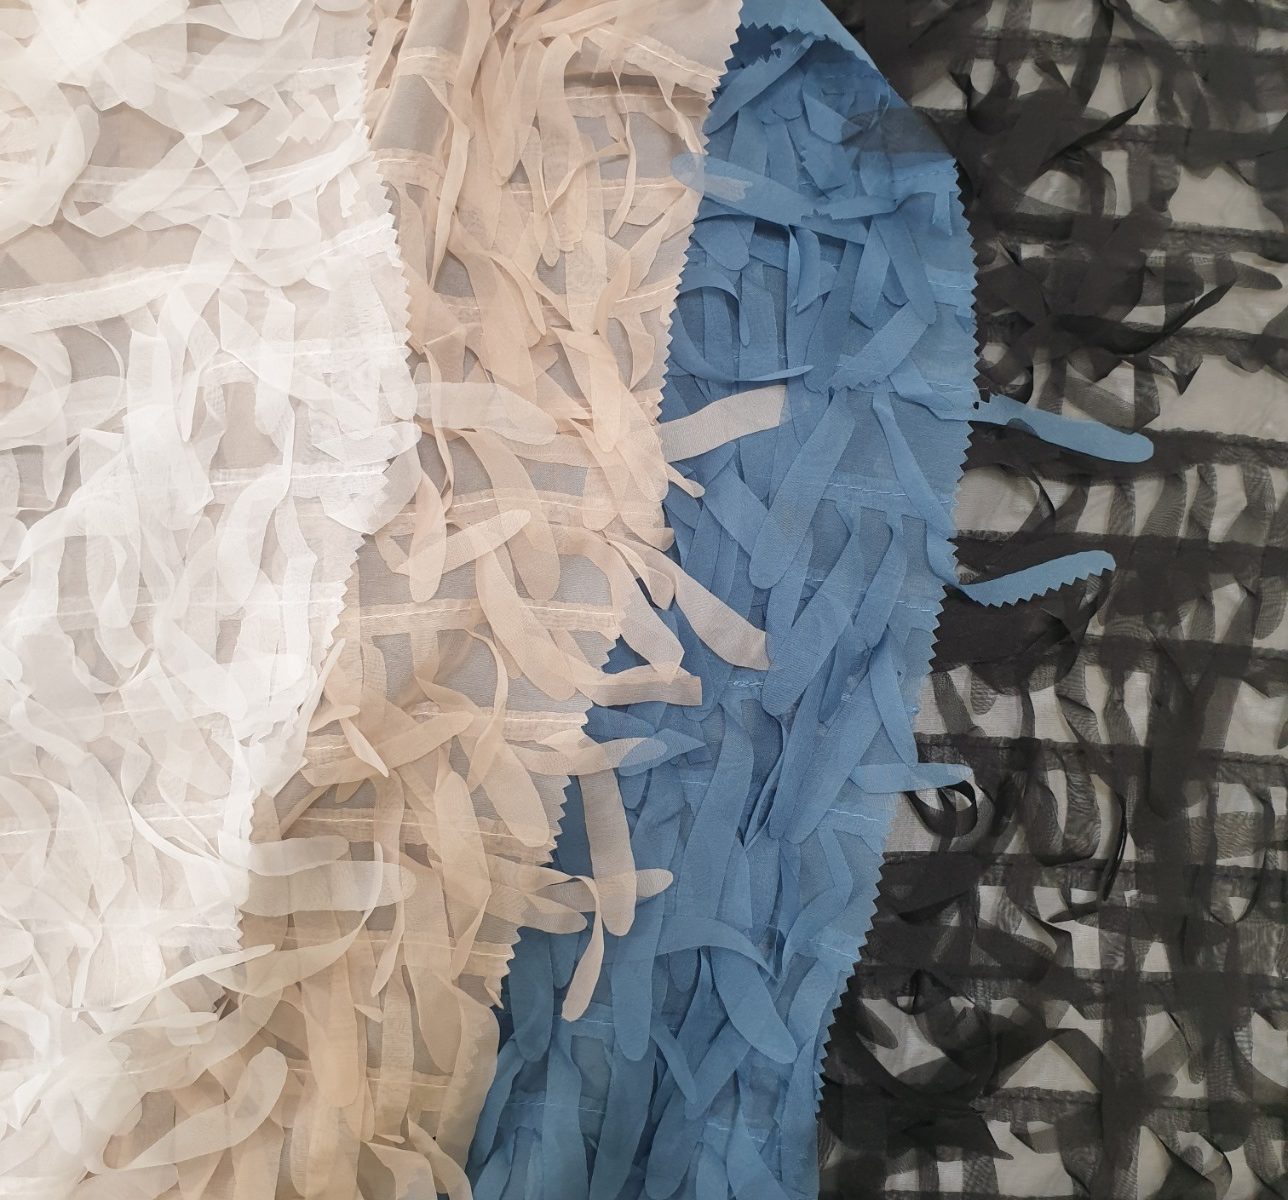 7825 allover fringed chiffon fabric for dresses WIDTH cm148 WEIGHT gr130 - gr87 square meter - COMPOSITION 100 polyester - white 1000mts – beige blue black 500mts each - price 12-15,6 eur